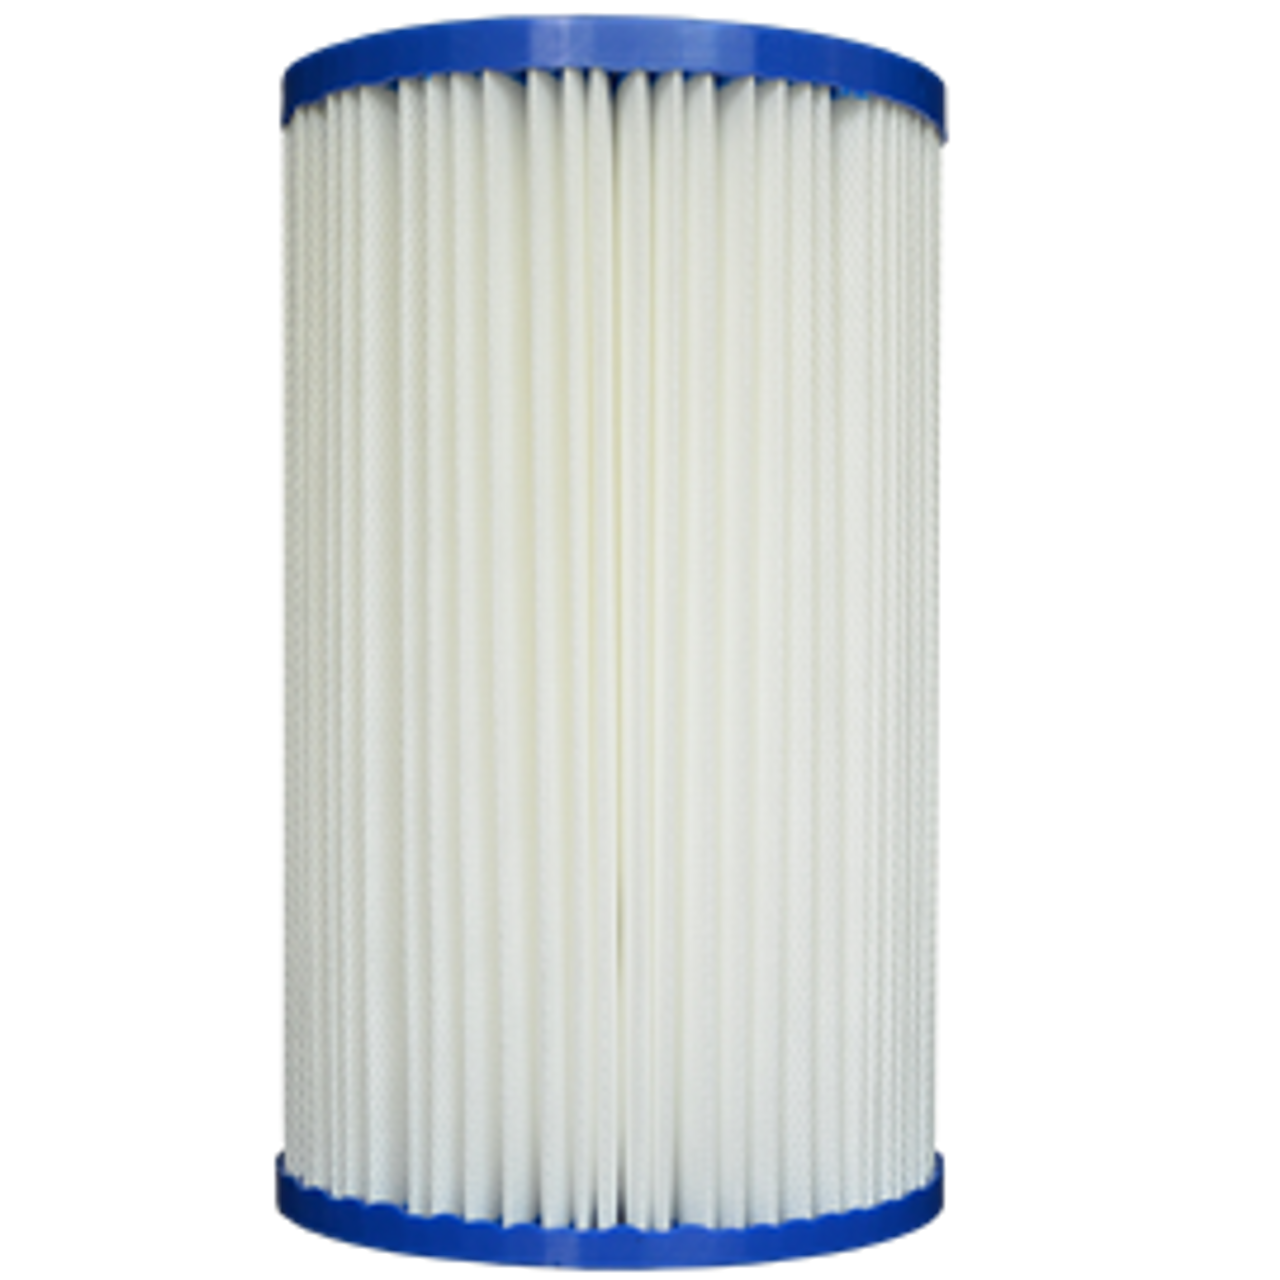 Pleatco PSR15 Filter Cartridge Replaces C-4610 and FC-2510